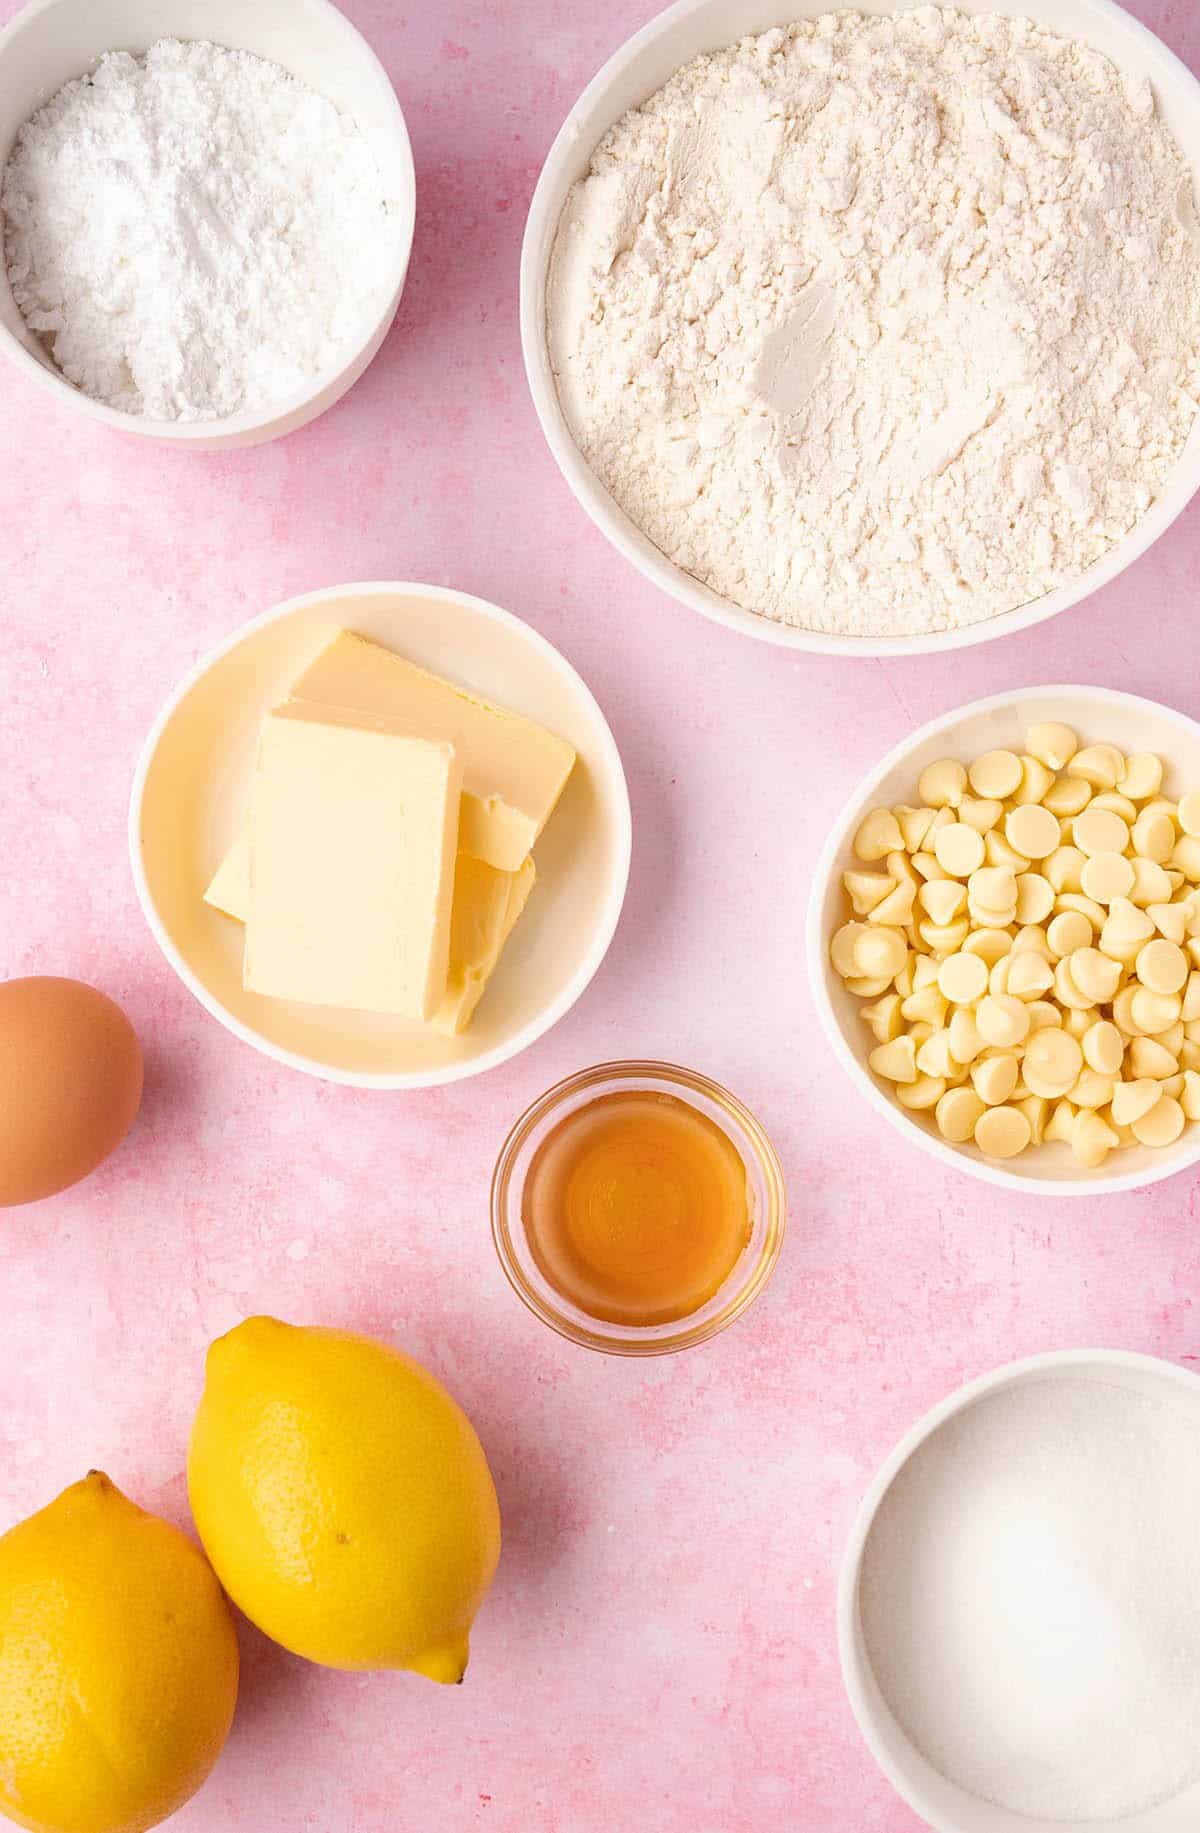 Top view of all the ingredients needed to make Lemon Crinkle Cookies from scratch,